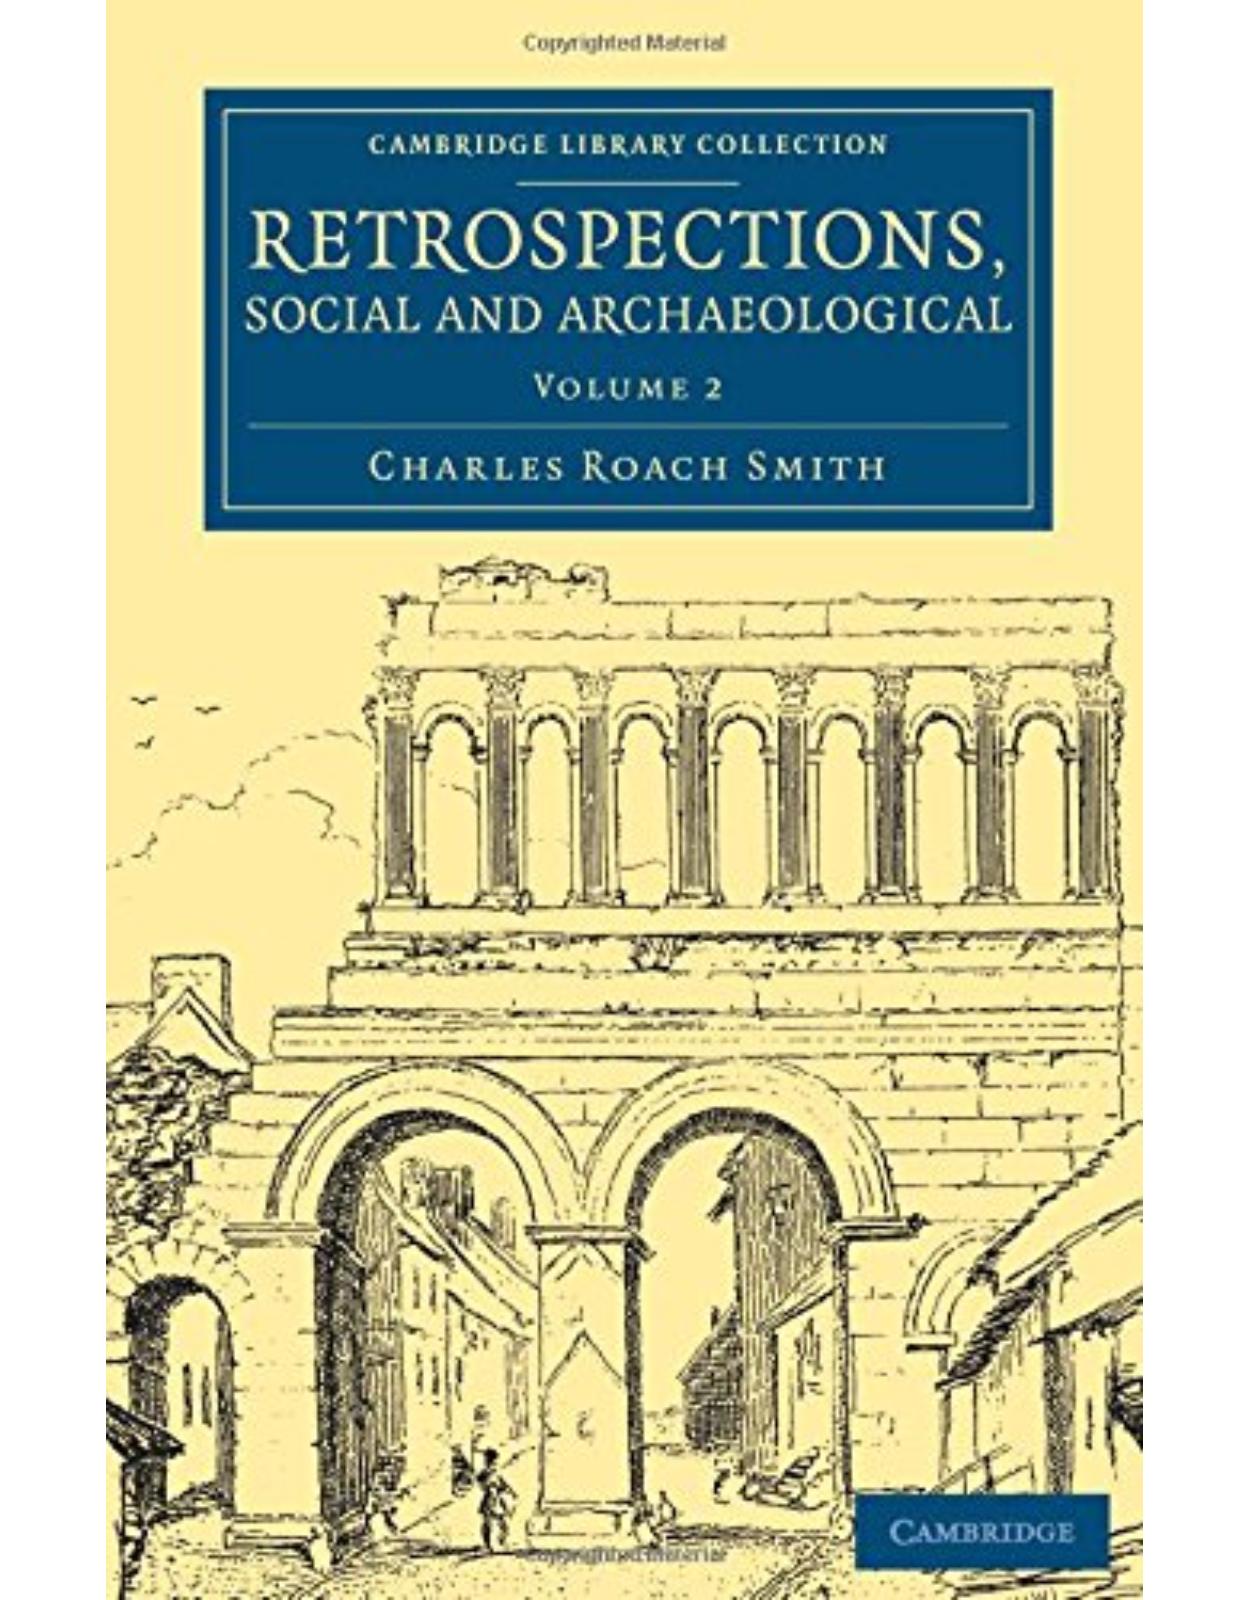 Retrospections, Social and Archaeological: Volume 2 (Cambridge Library Collection - Archaeology)